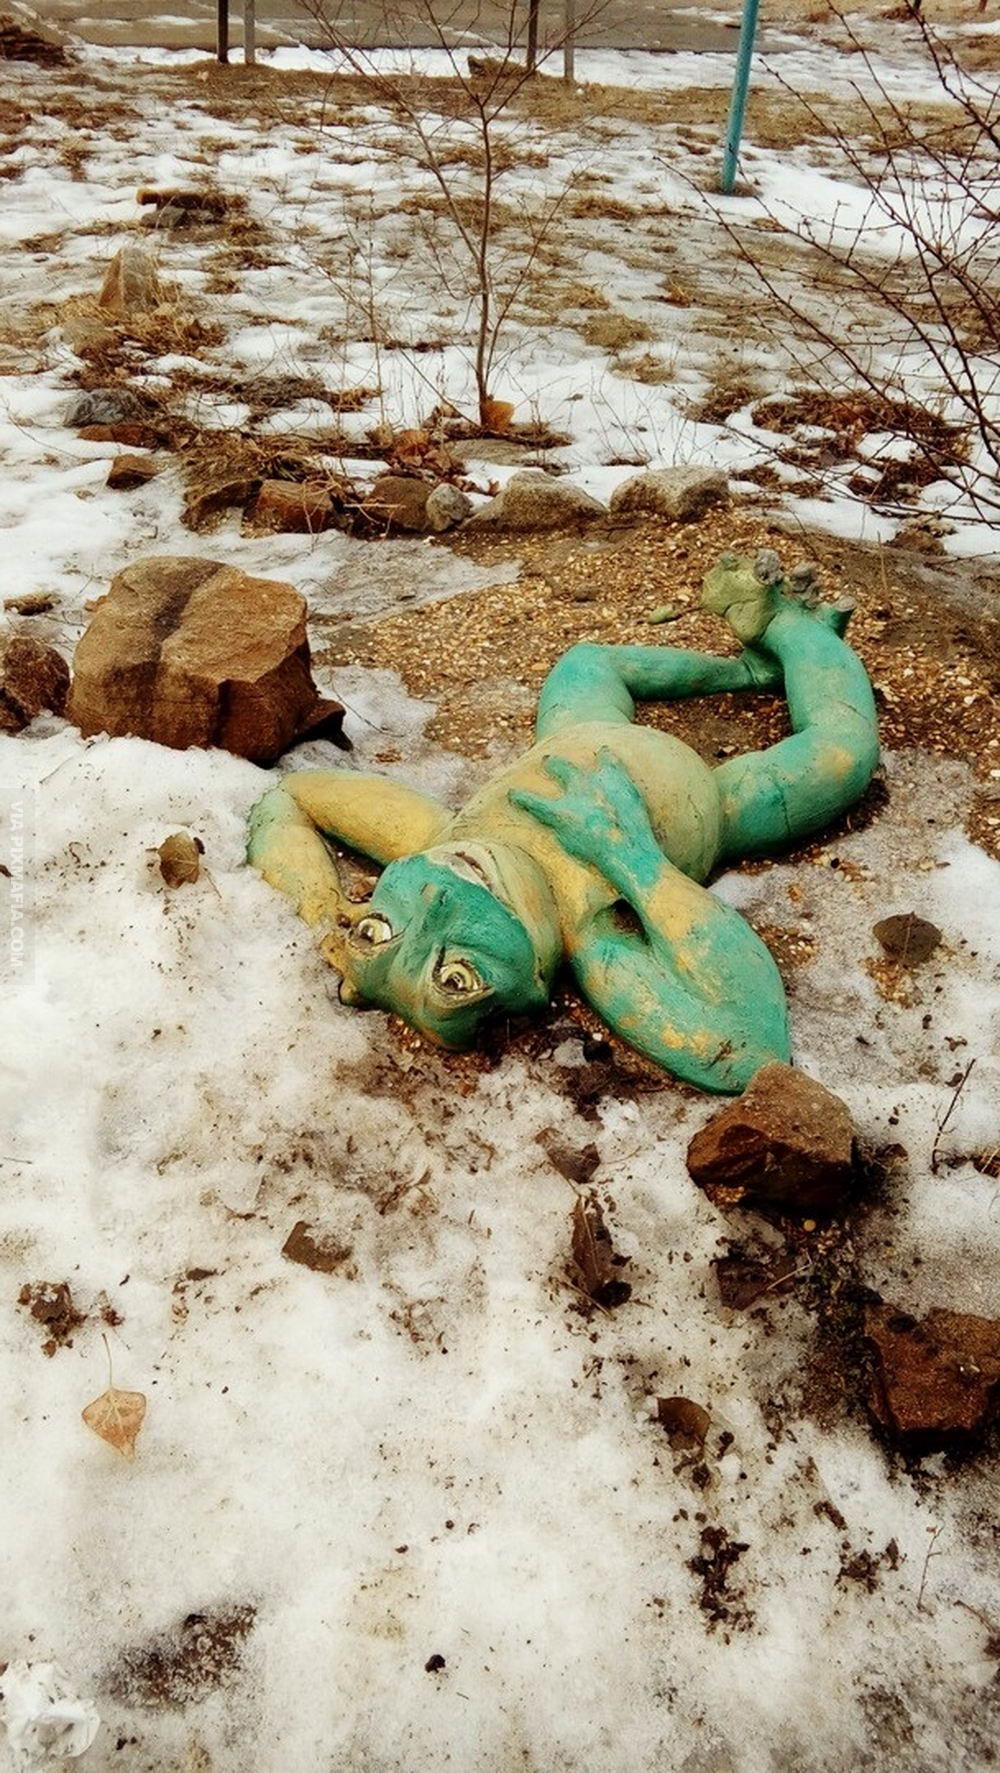 wtf images - sad frog statue in the snow